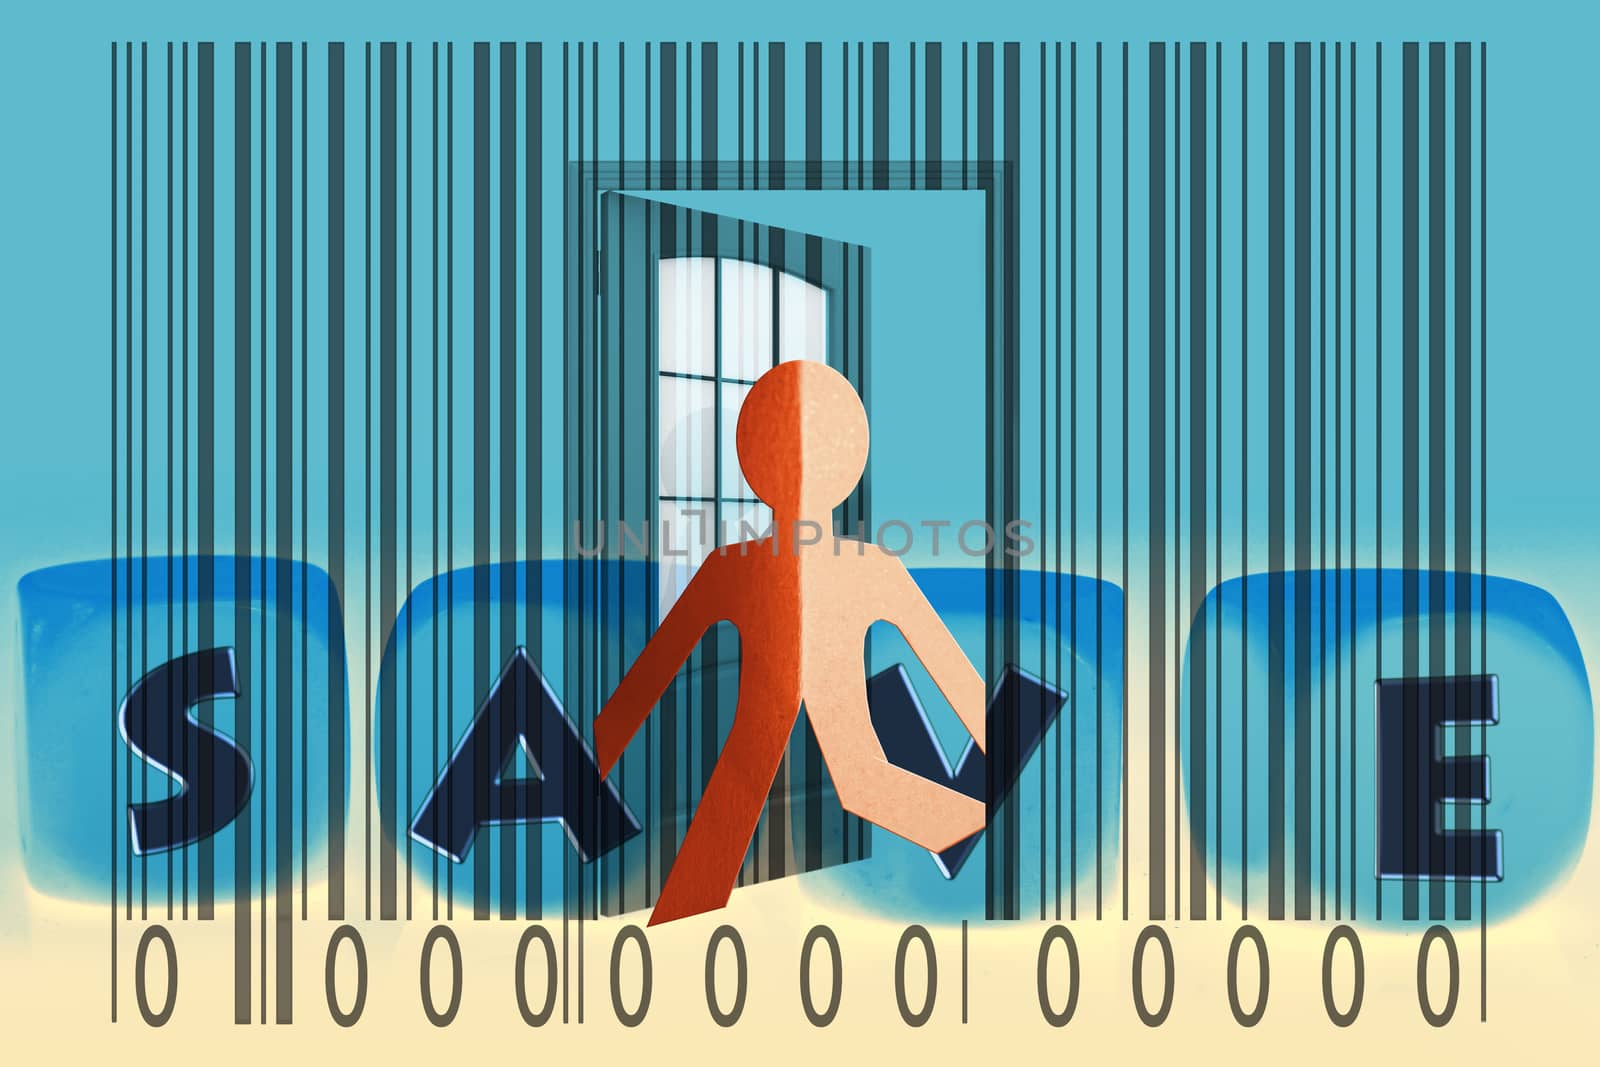 Paperman coming out of a bar code with Save word